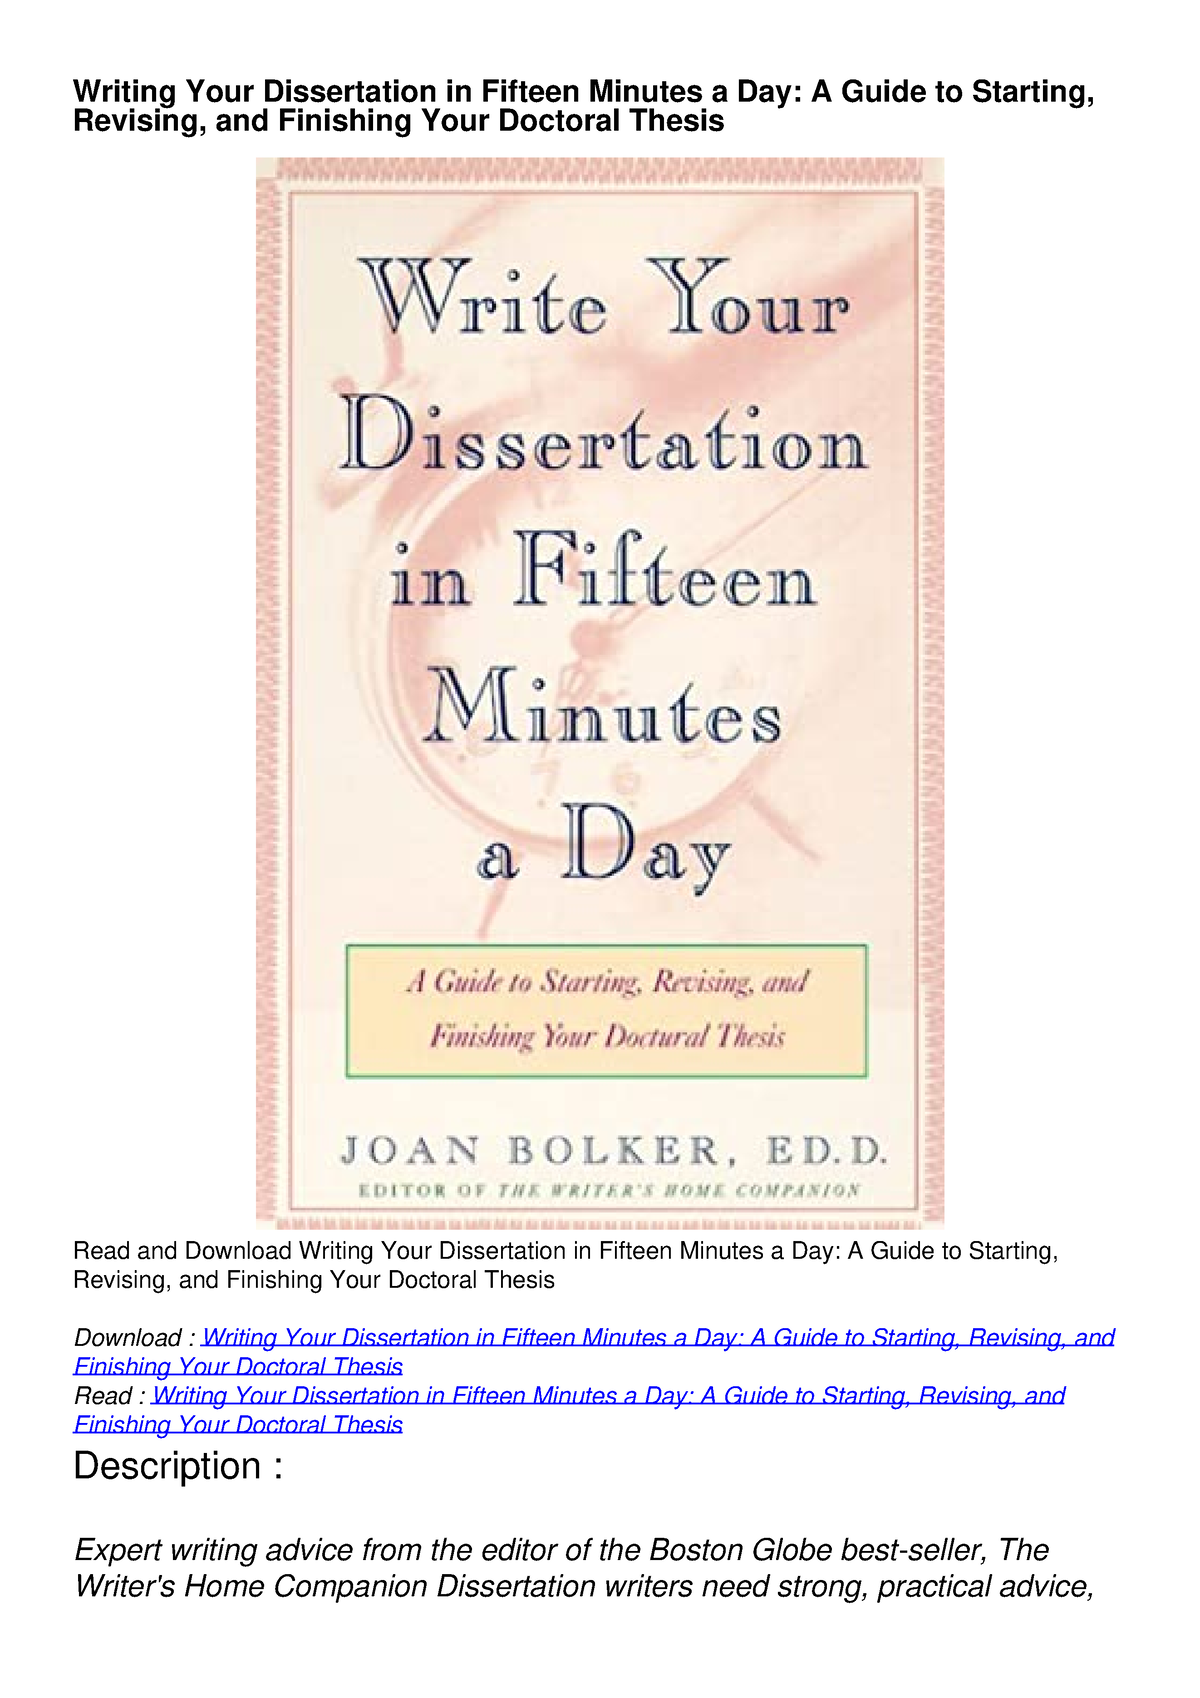 how to write your dissertation in 15 minutes a day pdf